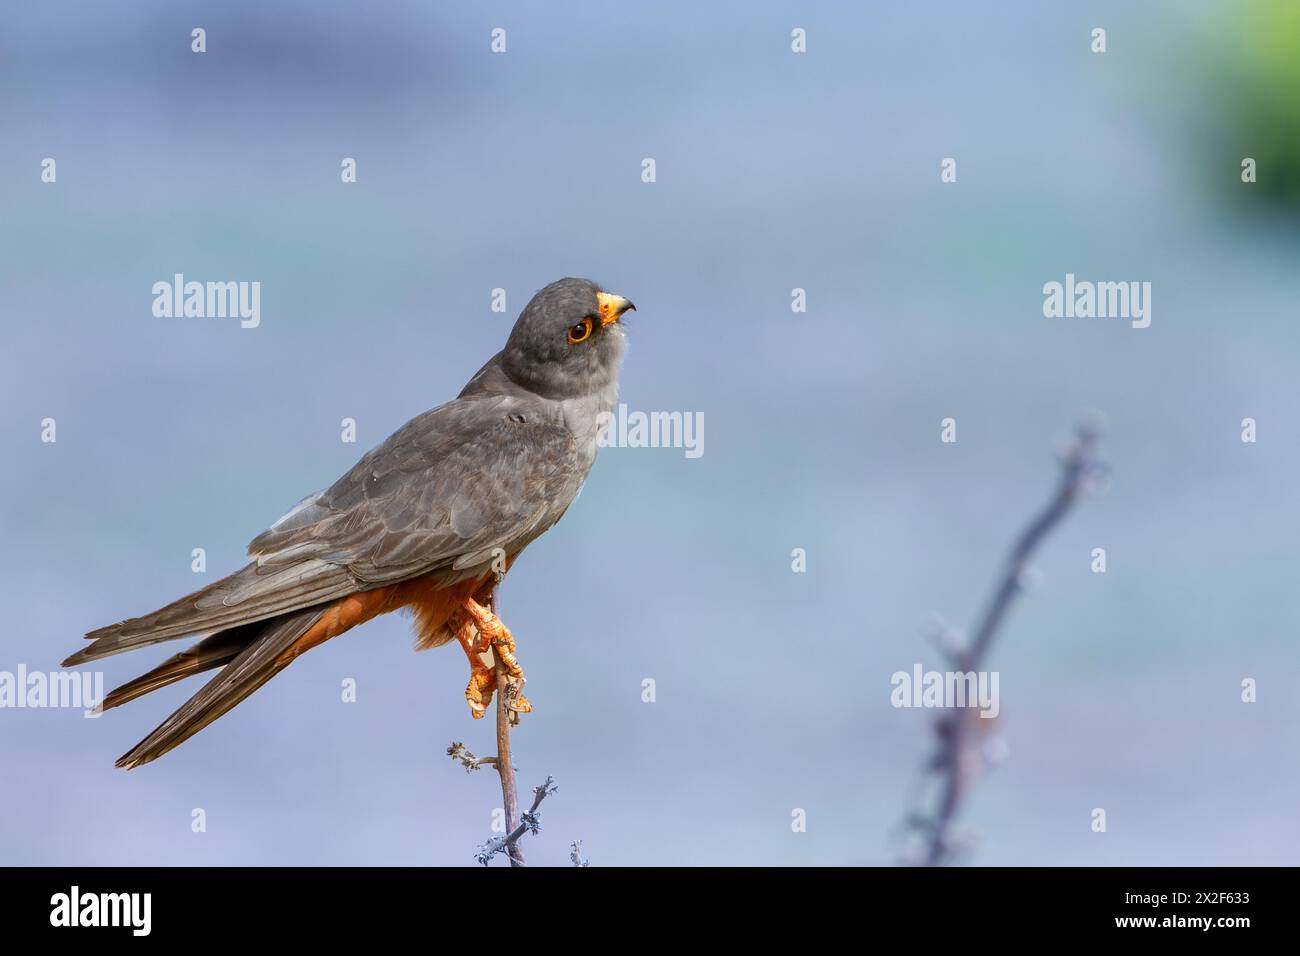 Male Red footed falcon (falco vespertinus) perched on a branch on the ground. This bird of prey is found in eastern Europe and Asia, but has become a Stock Photo